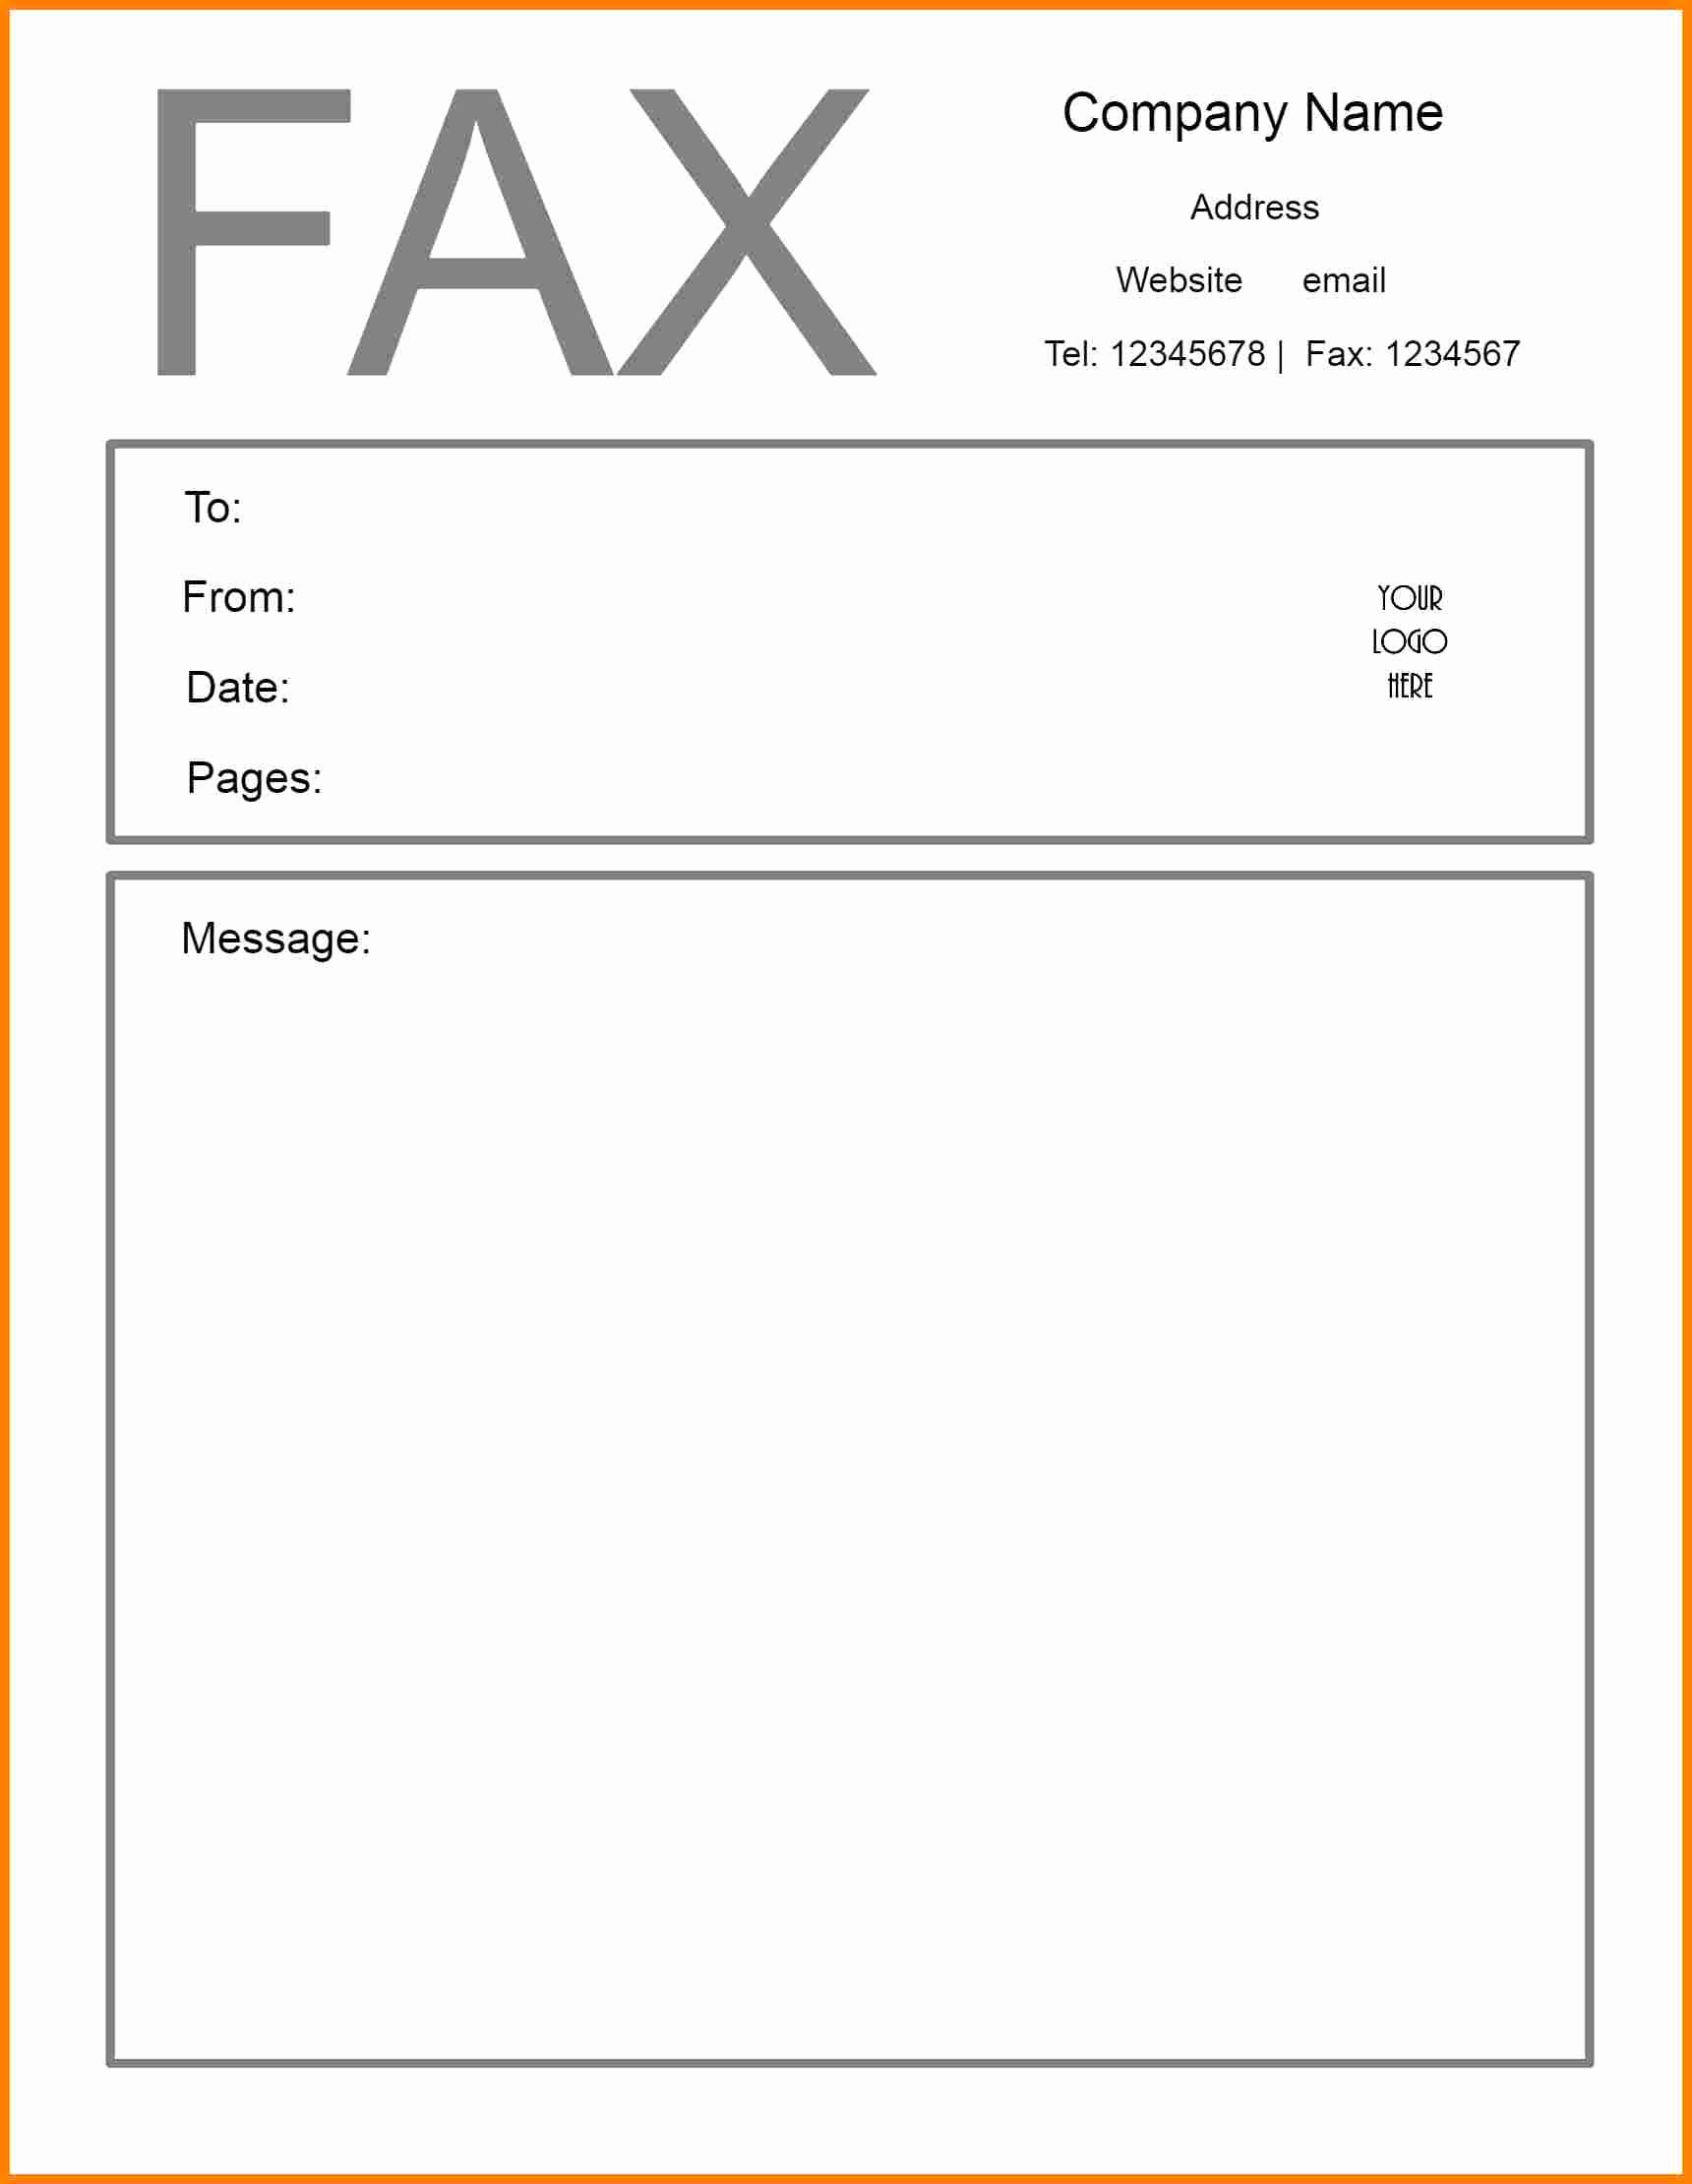 Fax Cover Sheet Printable Free Luxury Get Professional Personal Printable Free Fax Cover Sheet